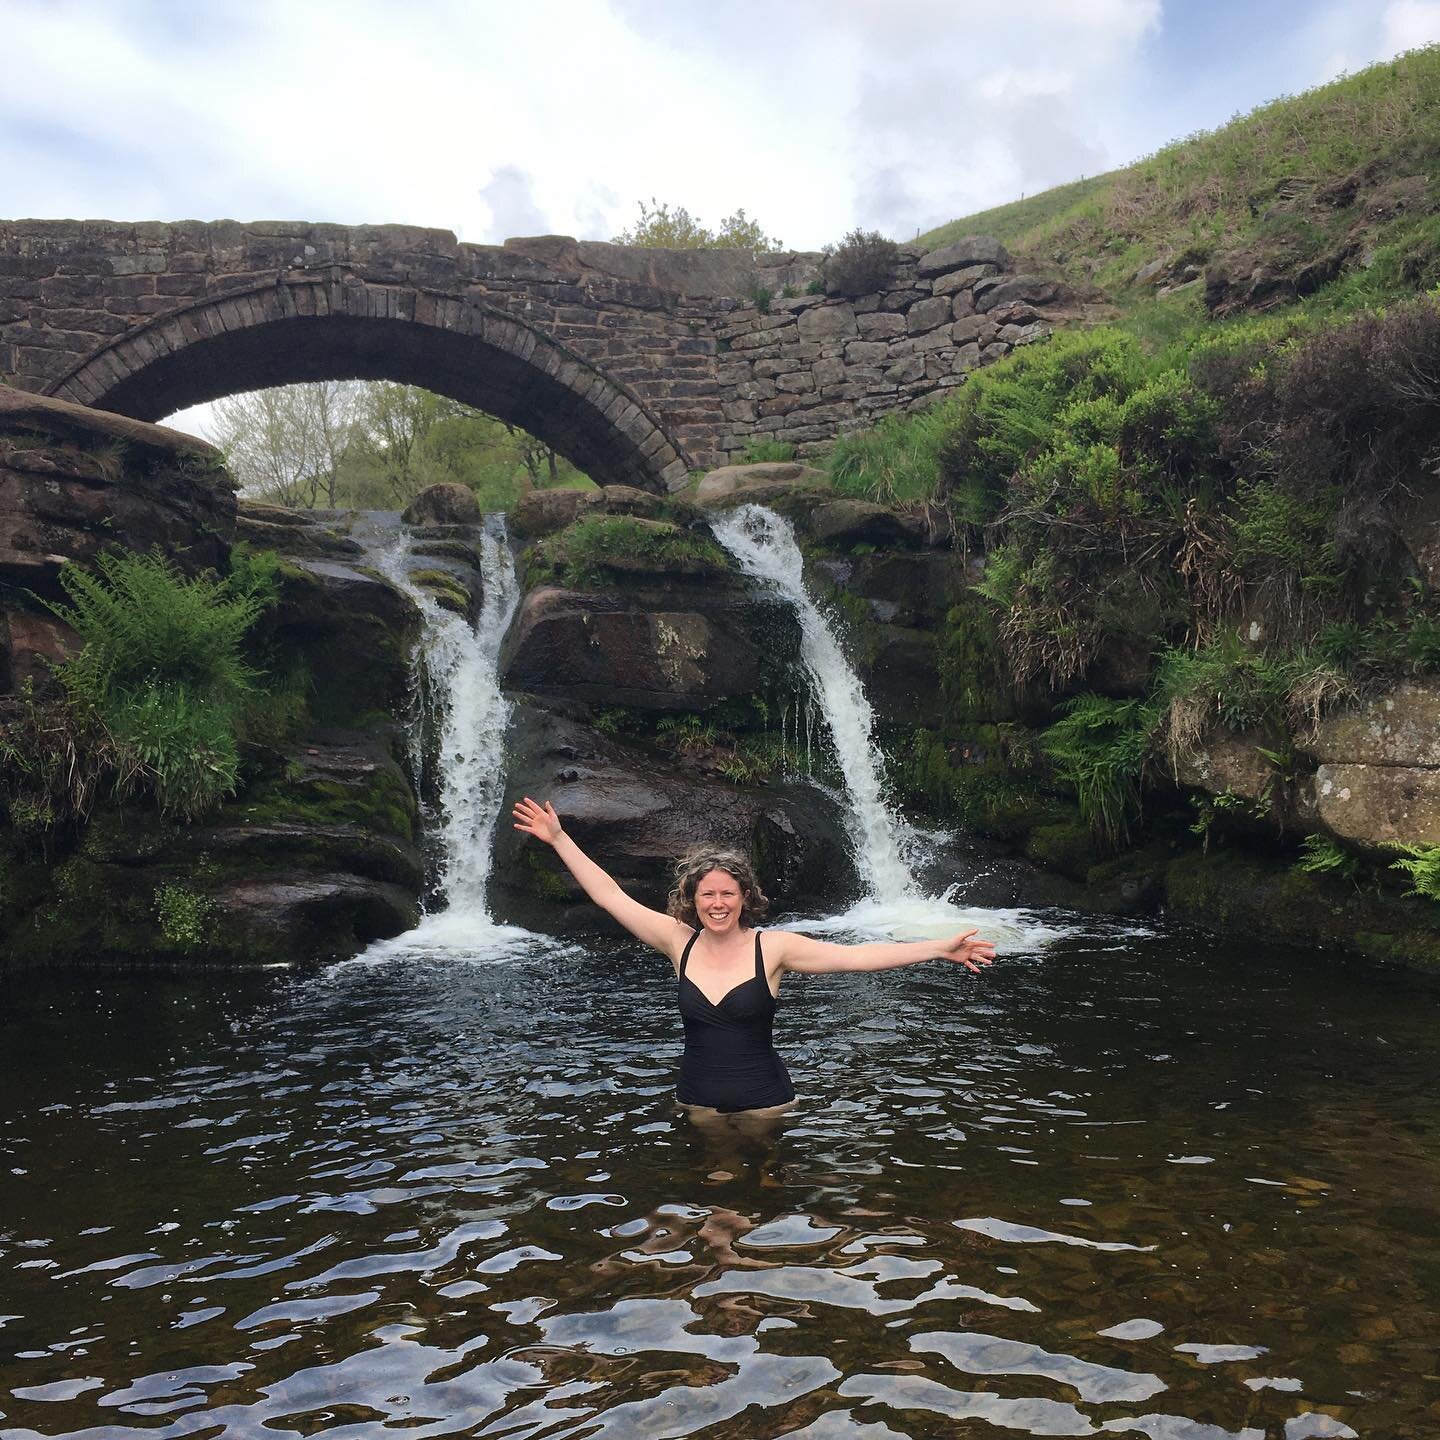 Connecting with my fluid body.

Did you know that our bodies are made up of about 60% water. I think that&rsquo;s pretty interesting!

I love paddling and swimming in water outdoors. Rivers, lakes, the sea... it makes me really happy.

Being in water